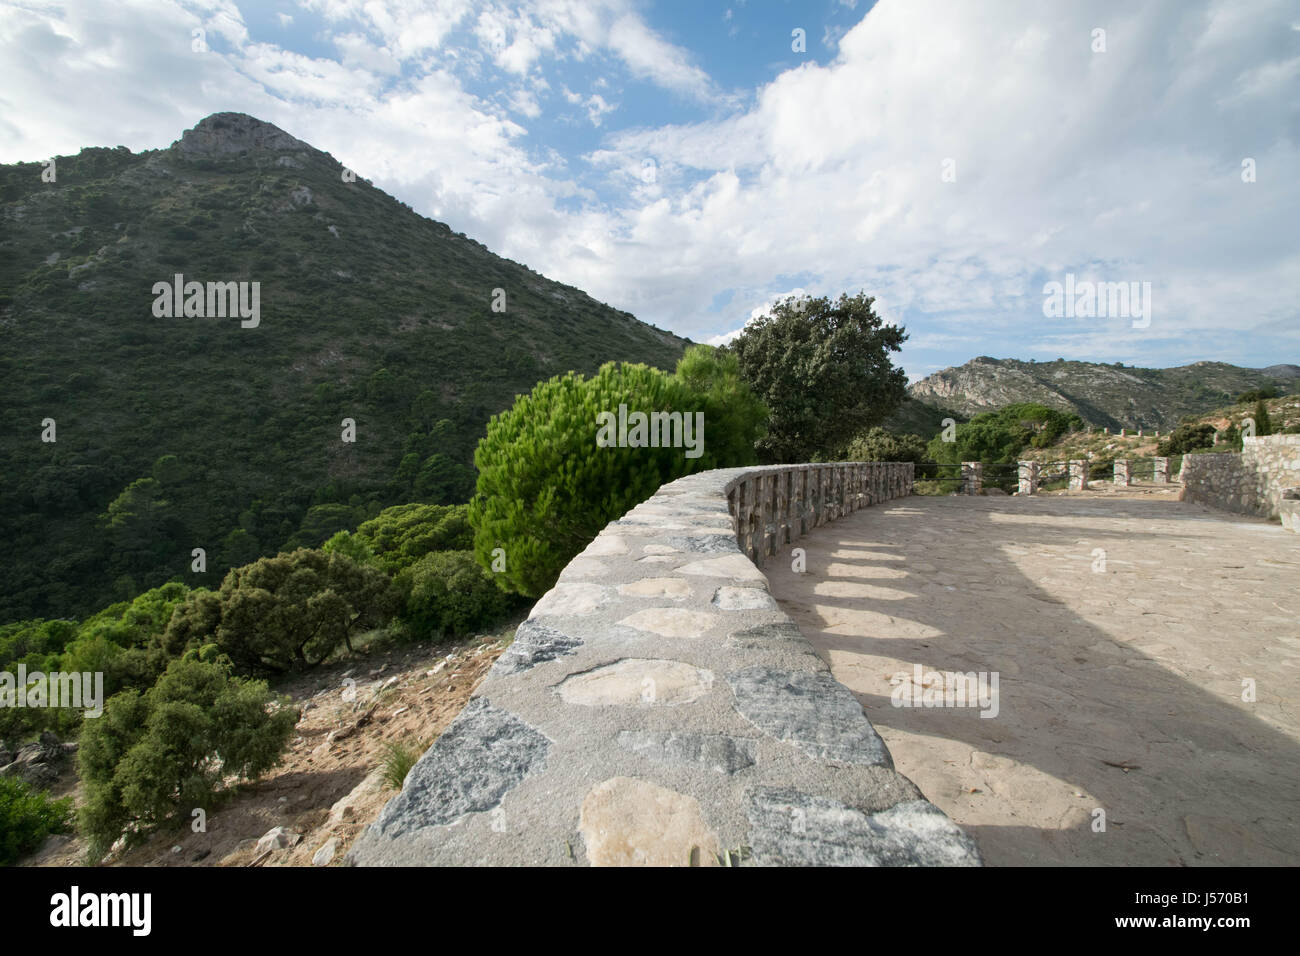 a stone path leading into the mountains in Marbella, Spain Stock Photo